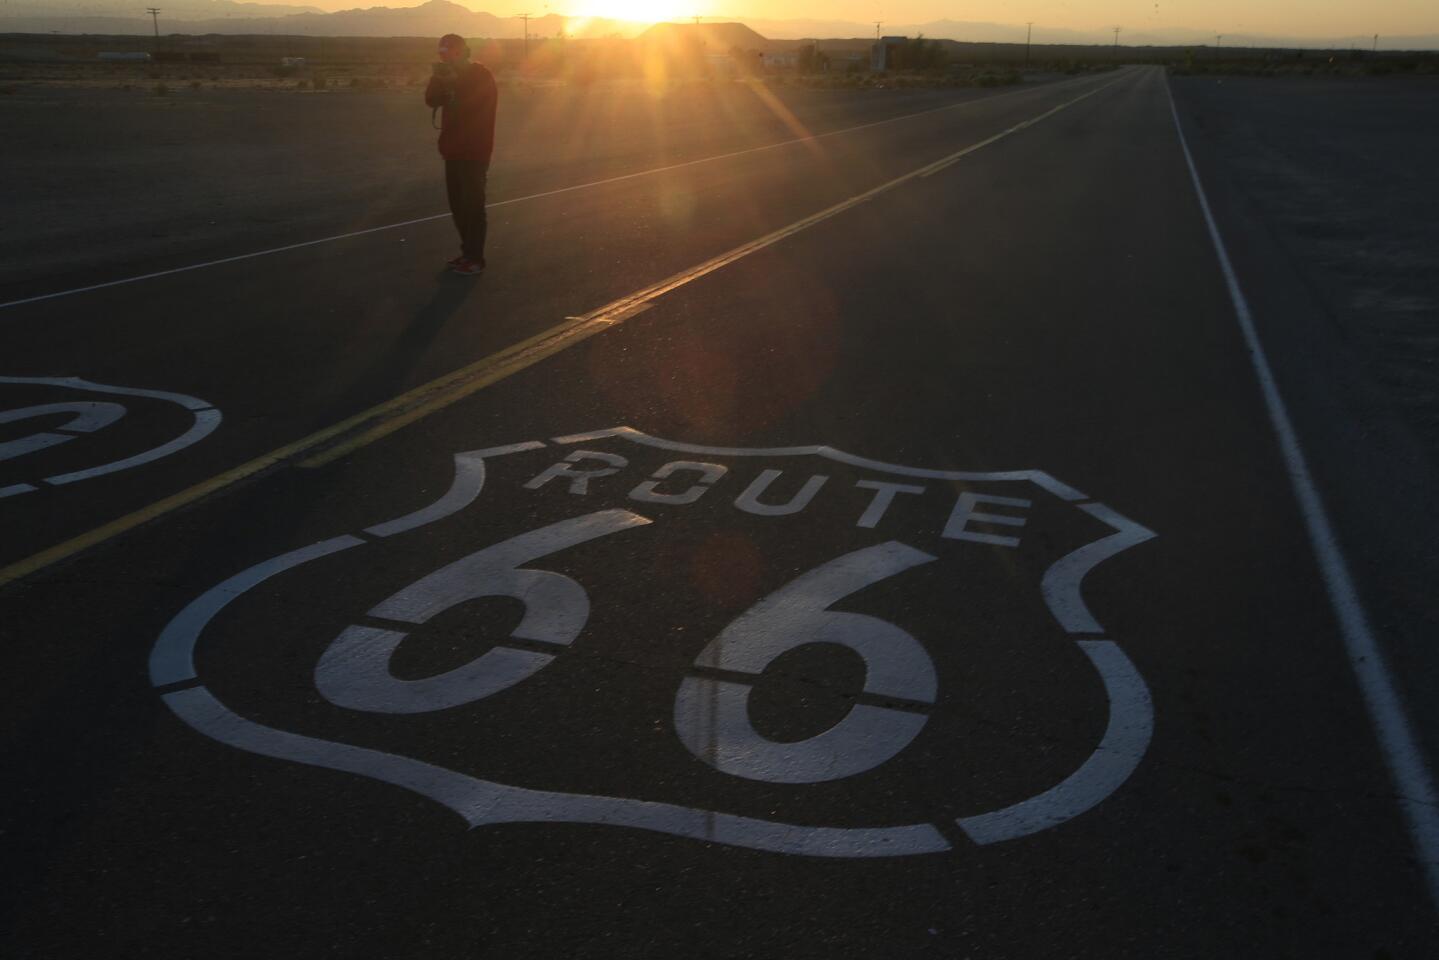 Countless tourists stop for photos of the Route 66 sign painted on the highway in Amboy, Calif.